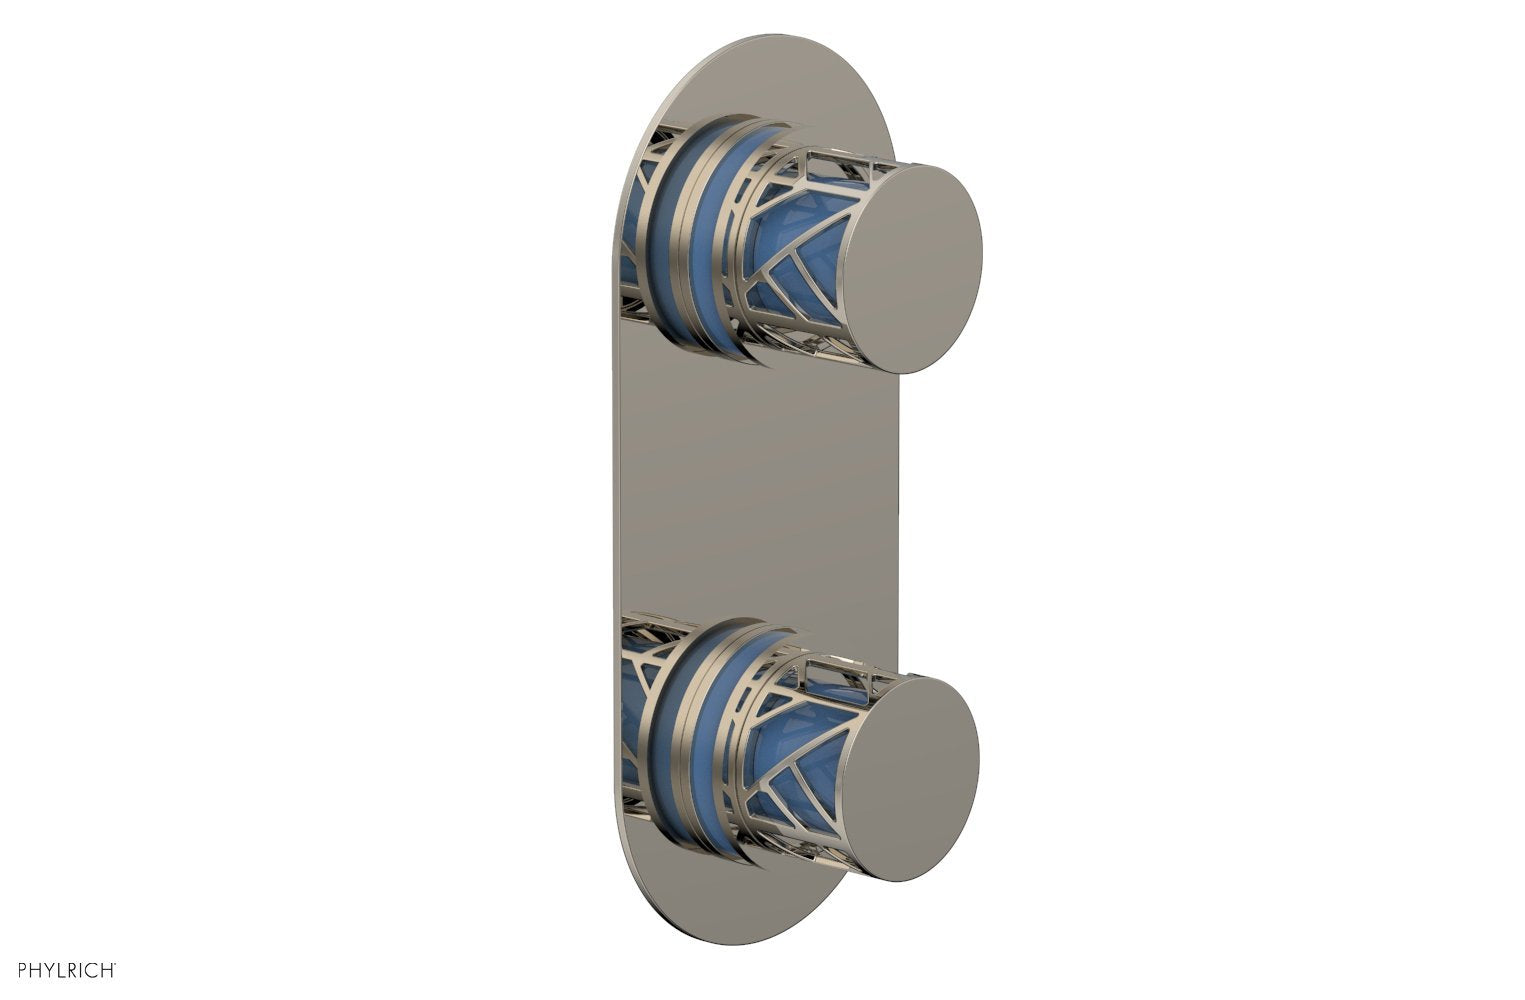 Phylrich JOLIE Thermostatic Valve with Volume Control or Diverter with "Light Blue" Accents